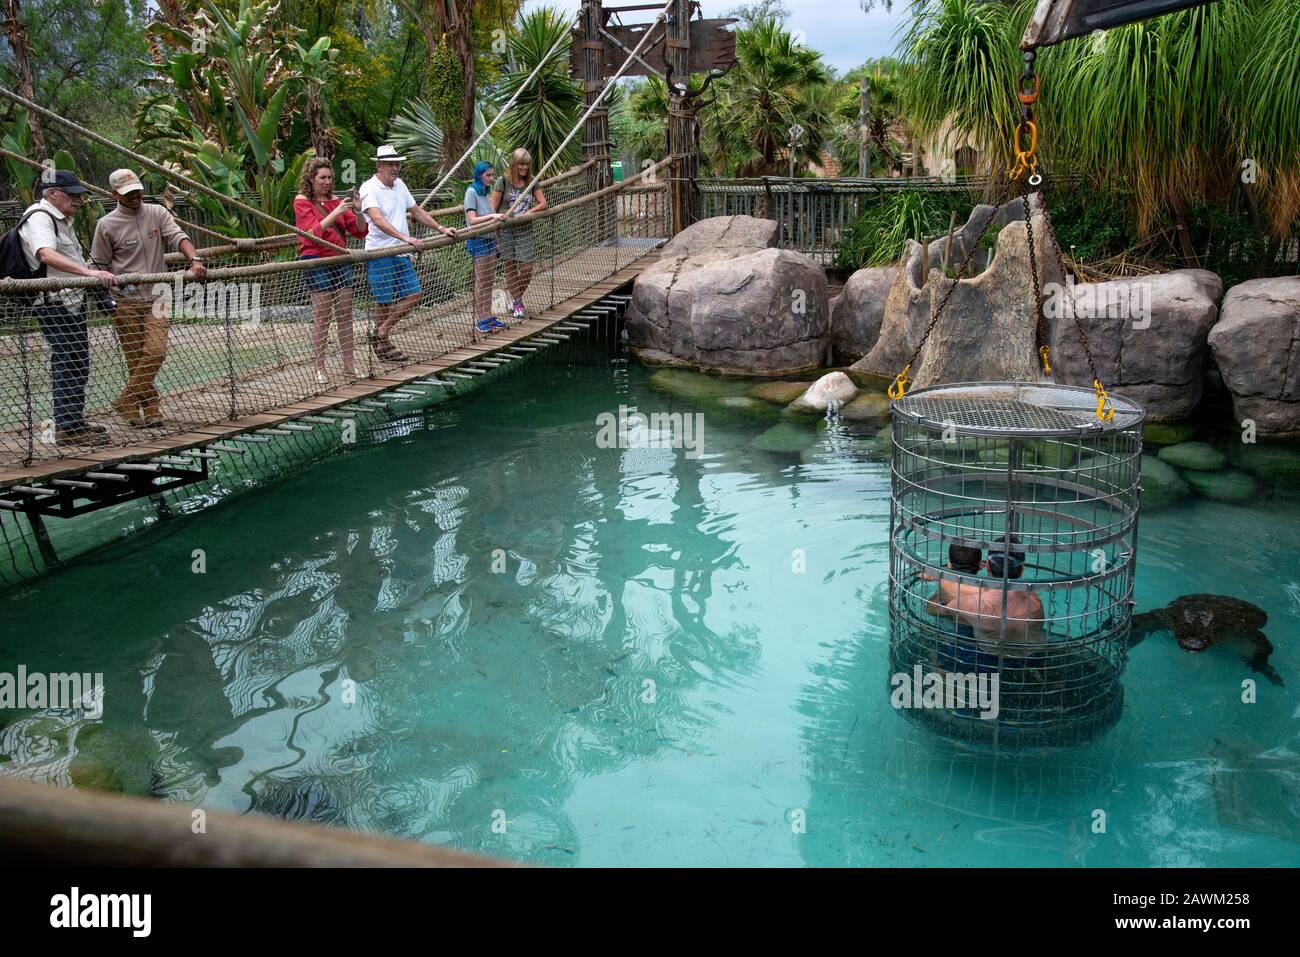 Father and son cage diving with a Nile crocodile at the Cango Wildlife Ranch, Oudtshoorn, Western Cape, South Africa Stock Photo